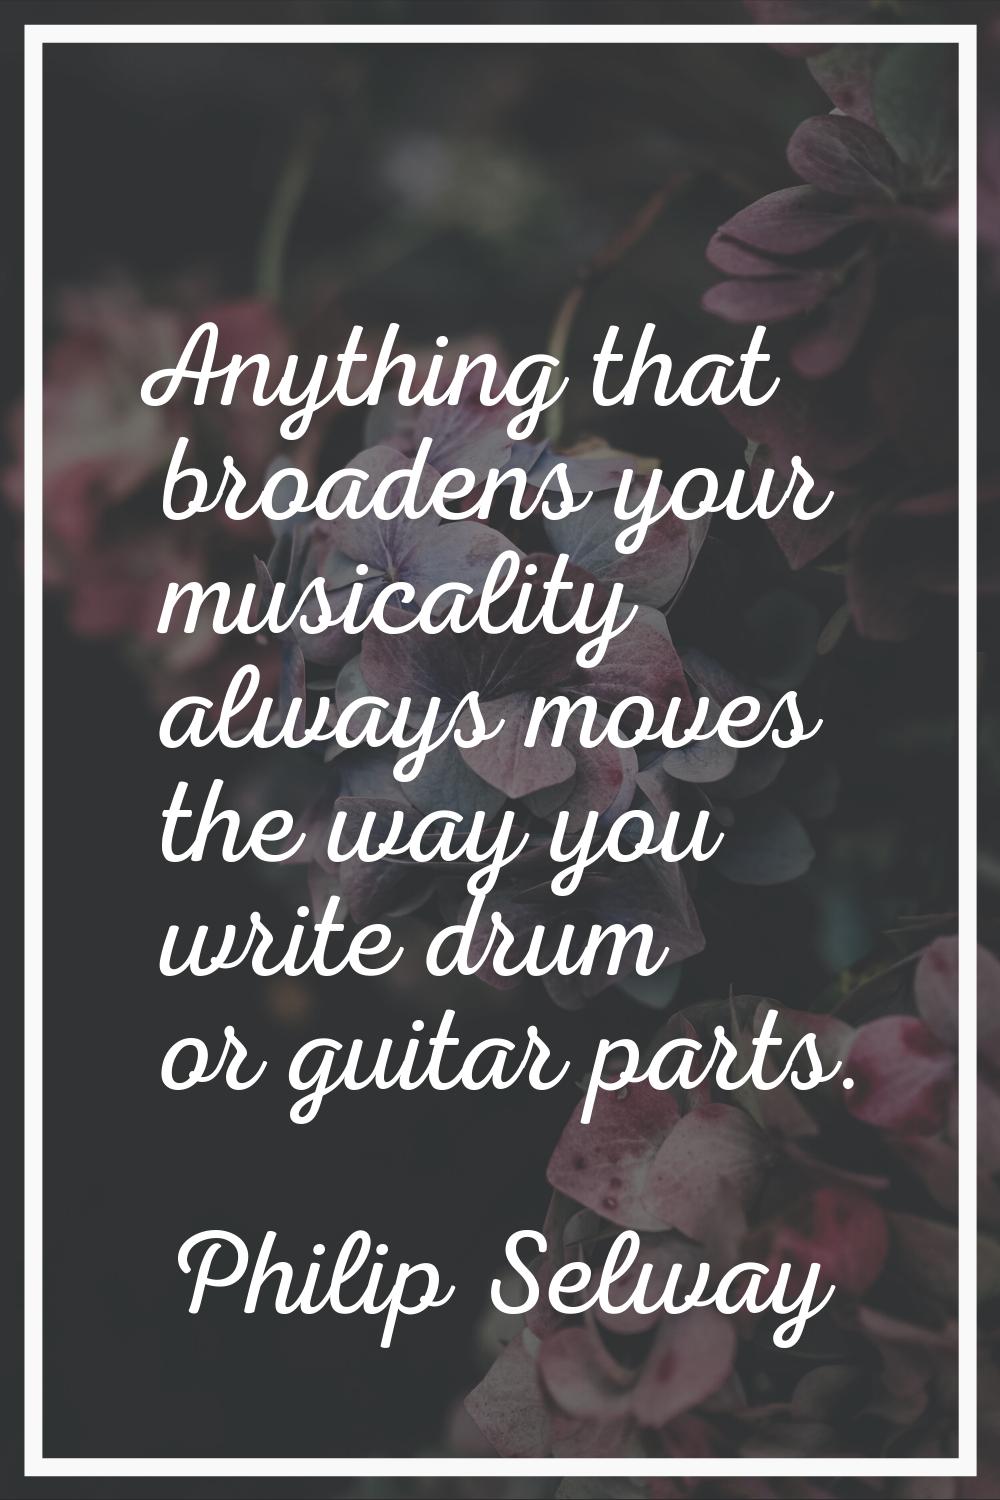 Anything that broadens your musicality always moves the way you write drum or guitar parts.